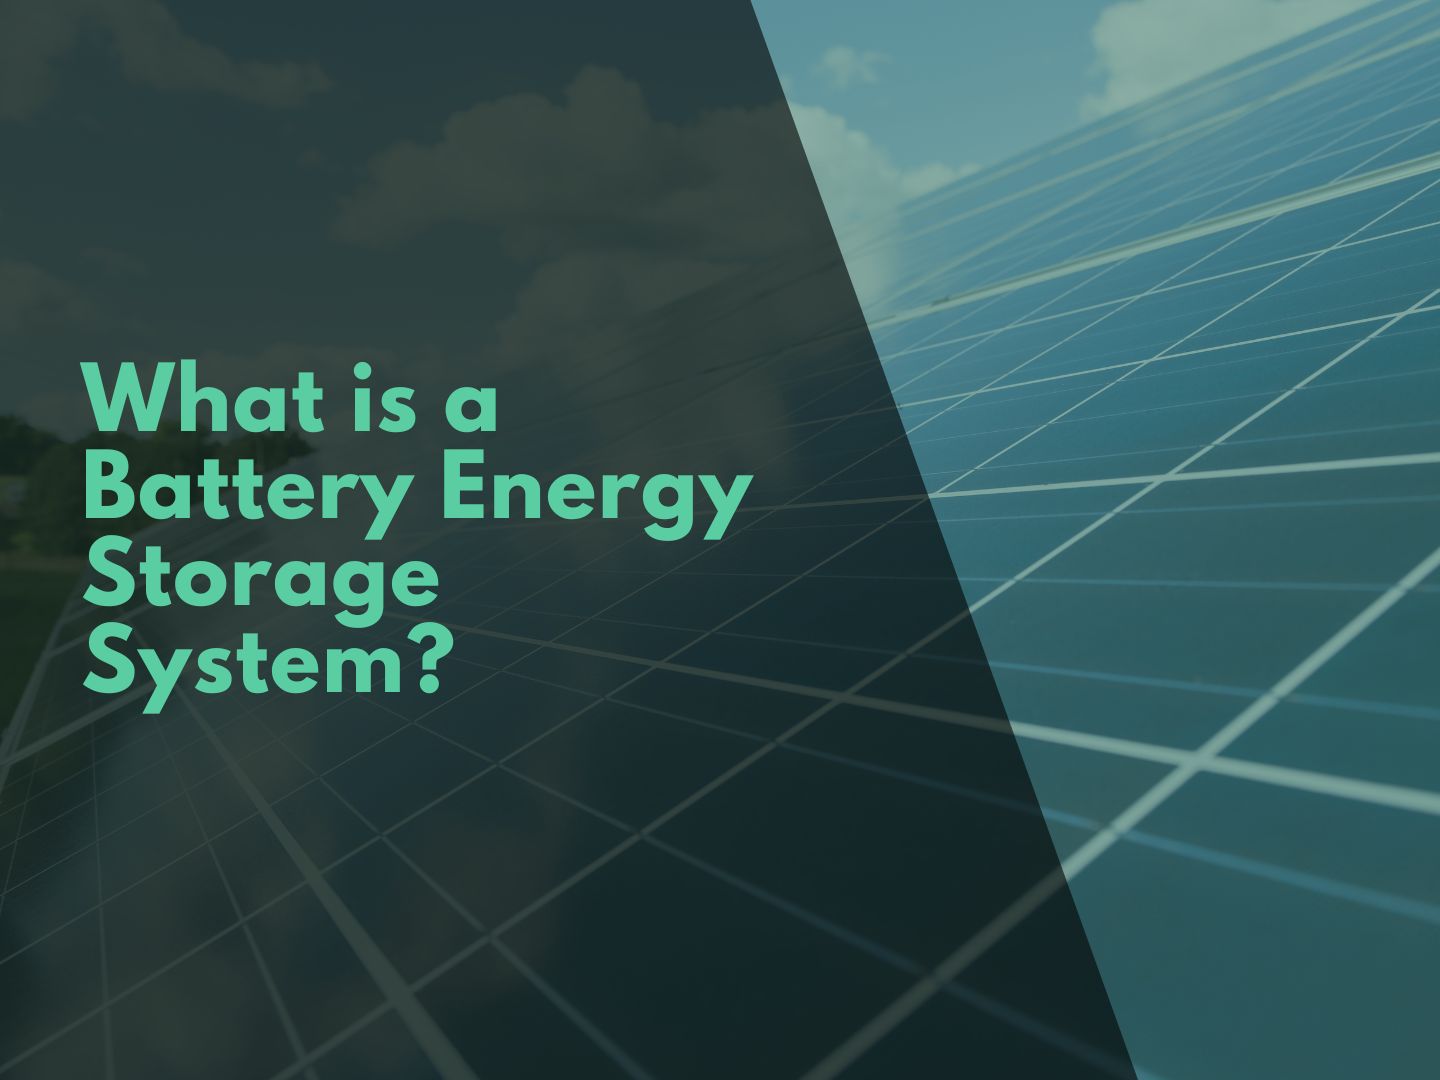 What is a Battery Energy Storage System?